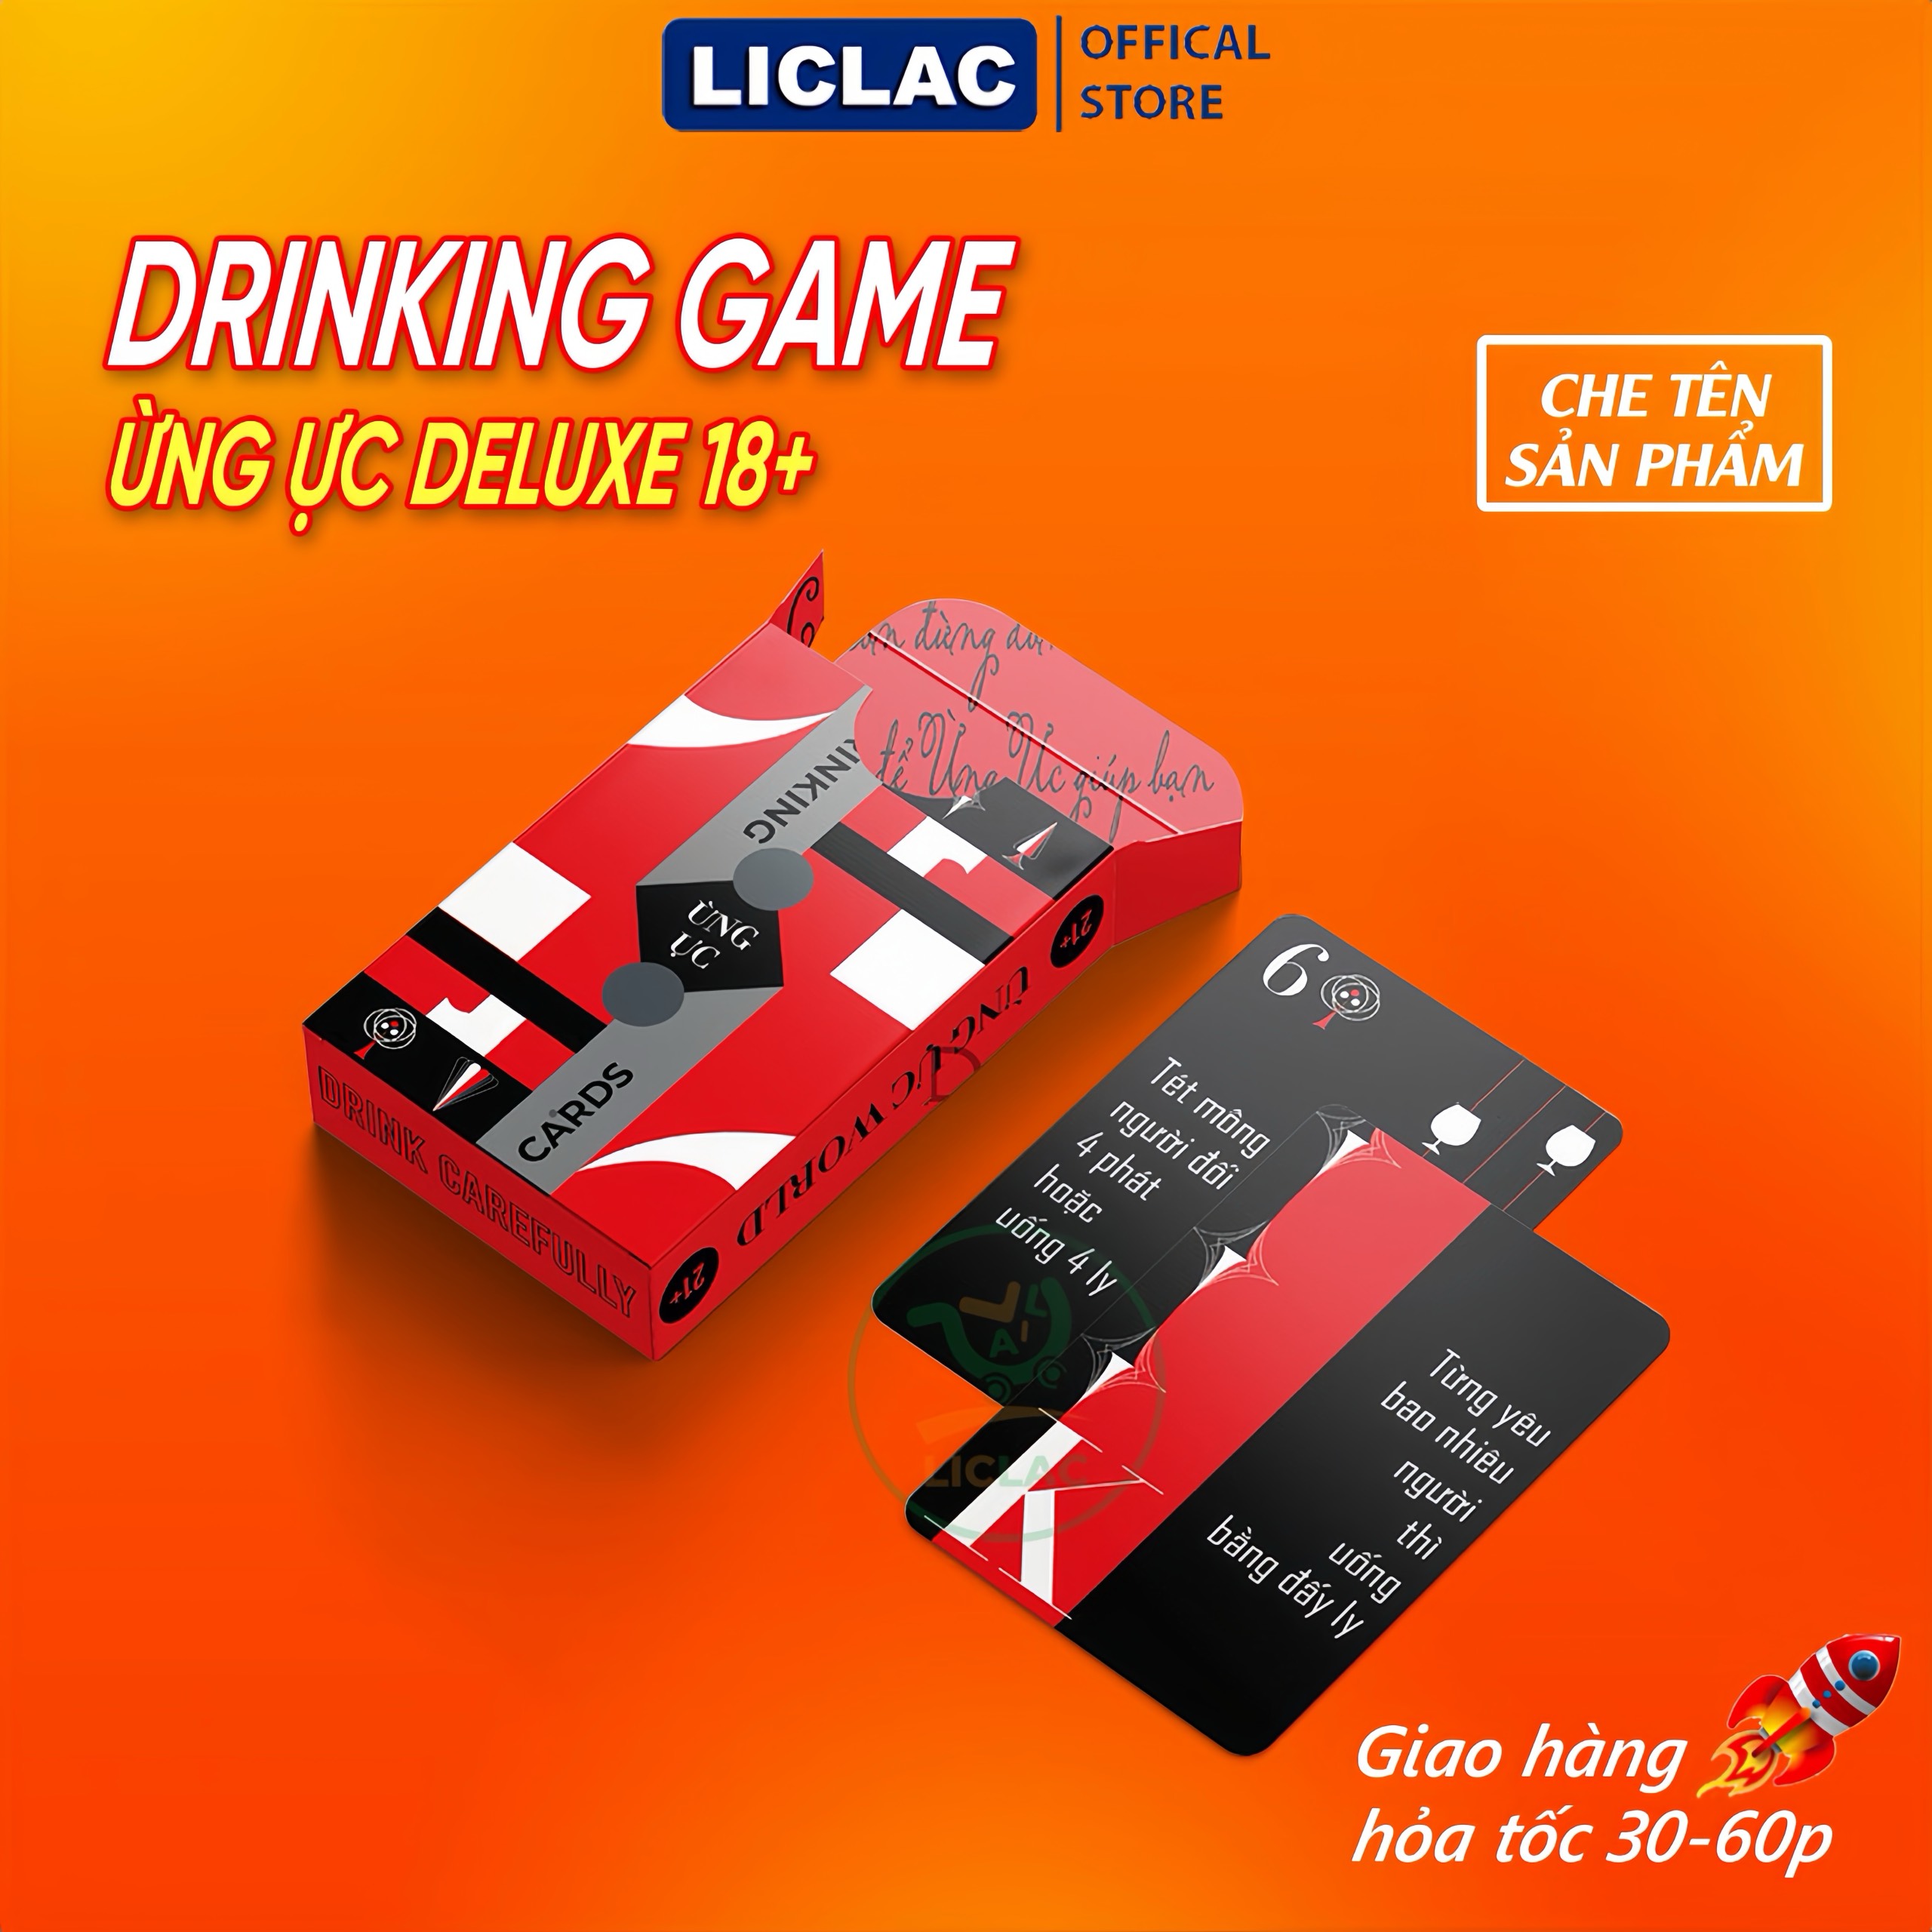 Up to 18 + premium drinking cards includes 52 challenge leaves